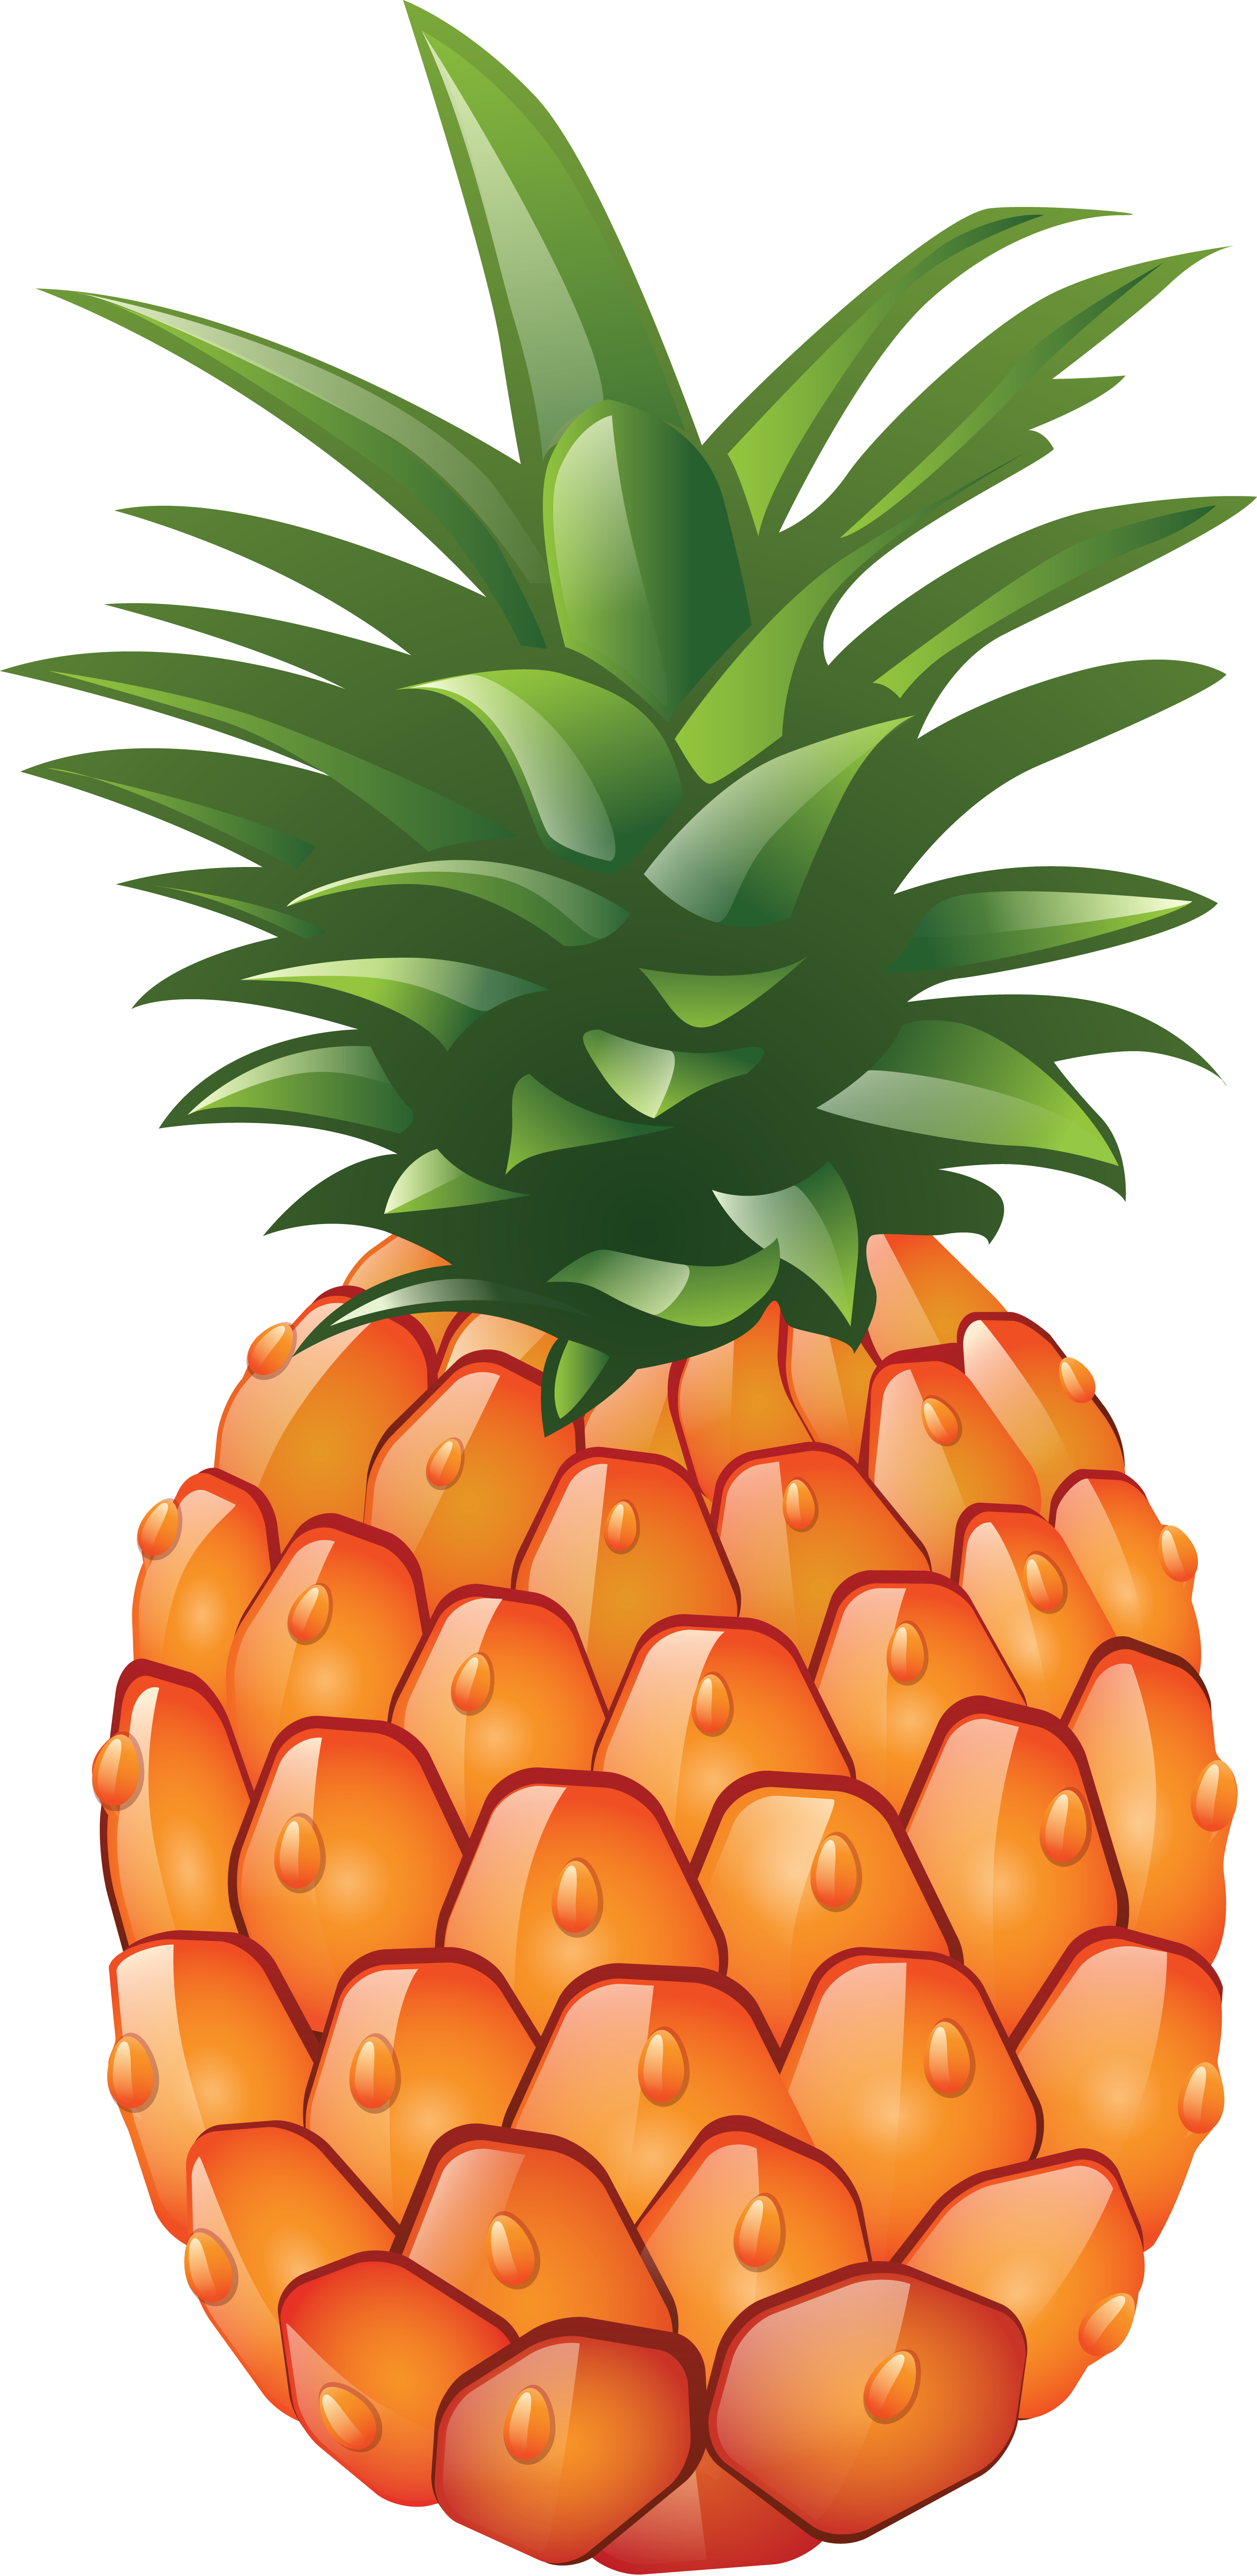 Download PNG image - Pineapple PNG HD Photo 